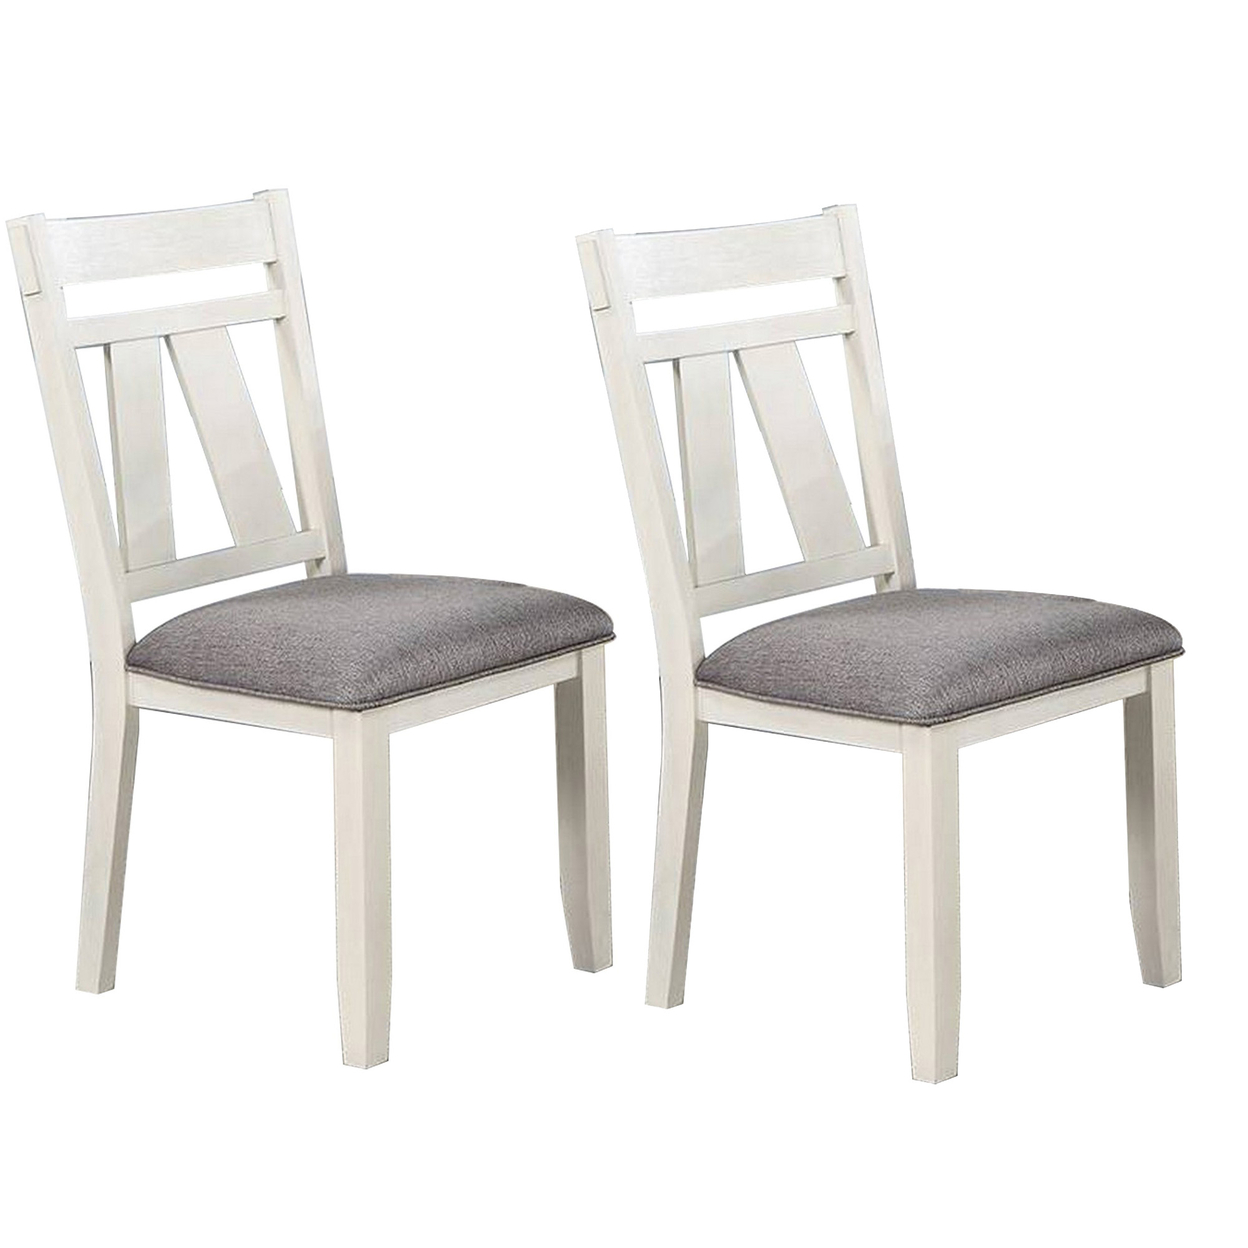 Lexi 24 Inch Classic Dining Side Chair, Padded Seat, Set Of 2, Gray, White- Saltoro Sherpi